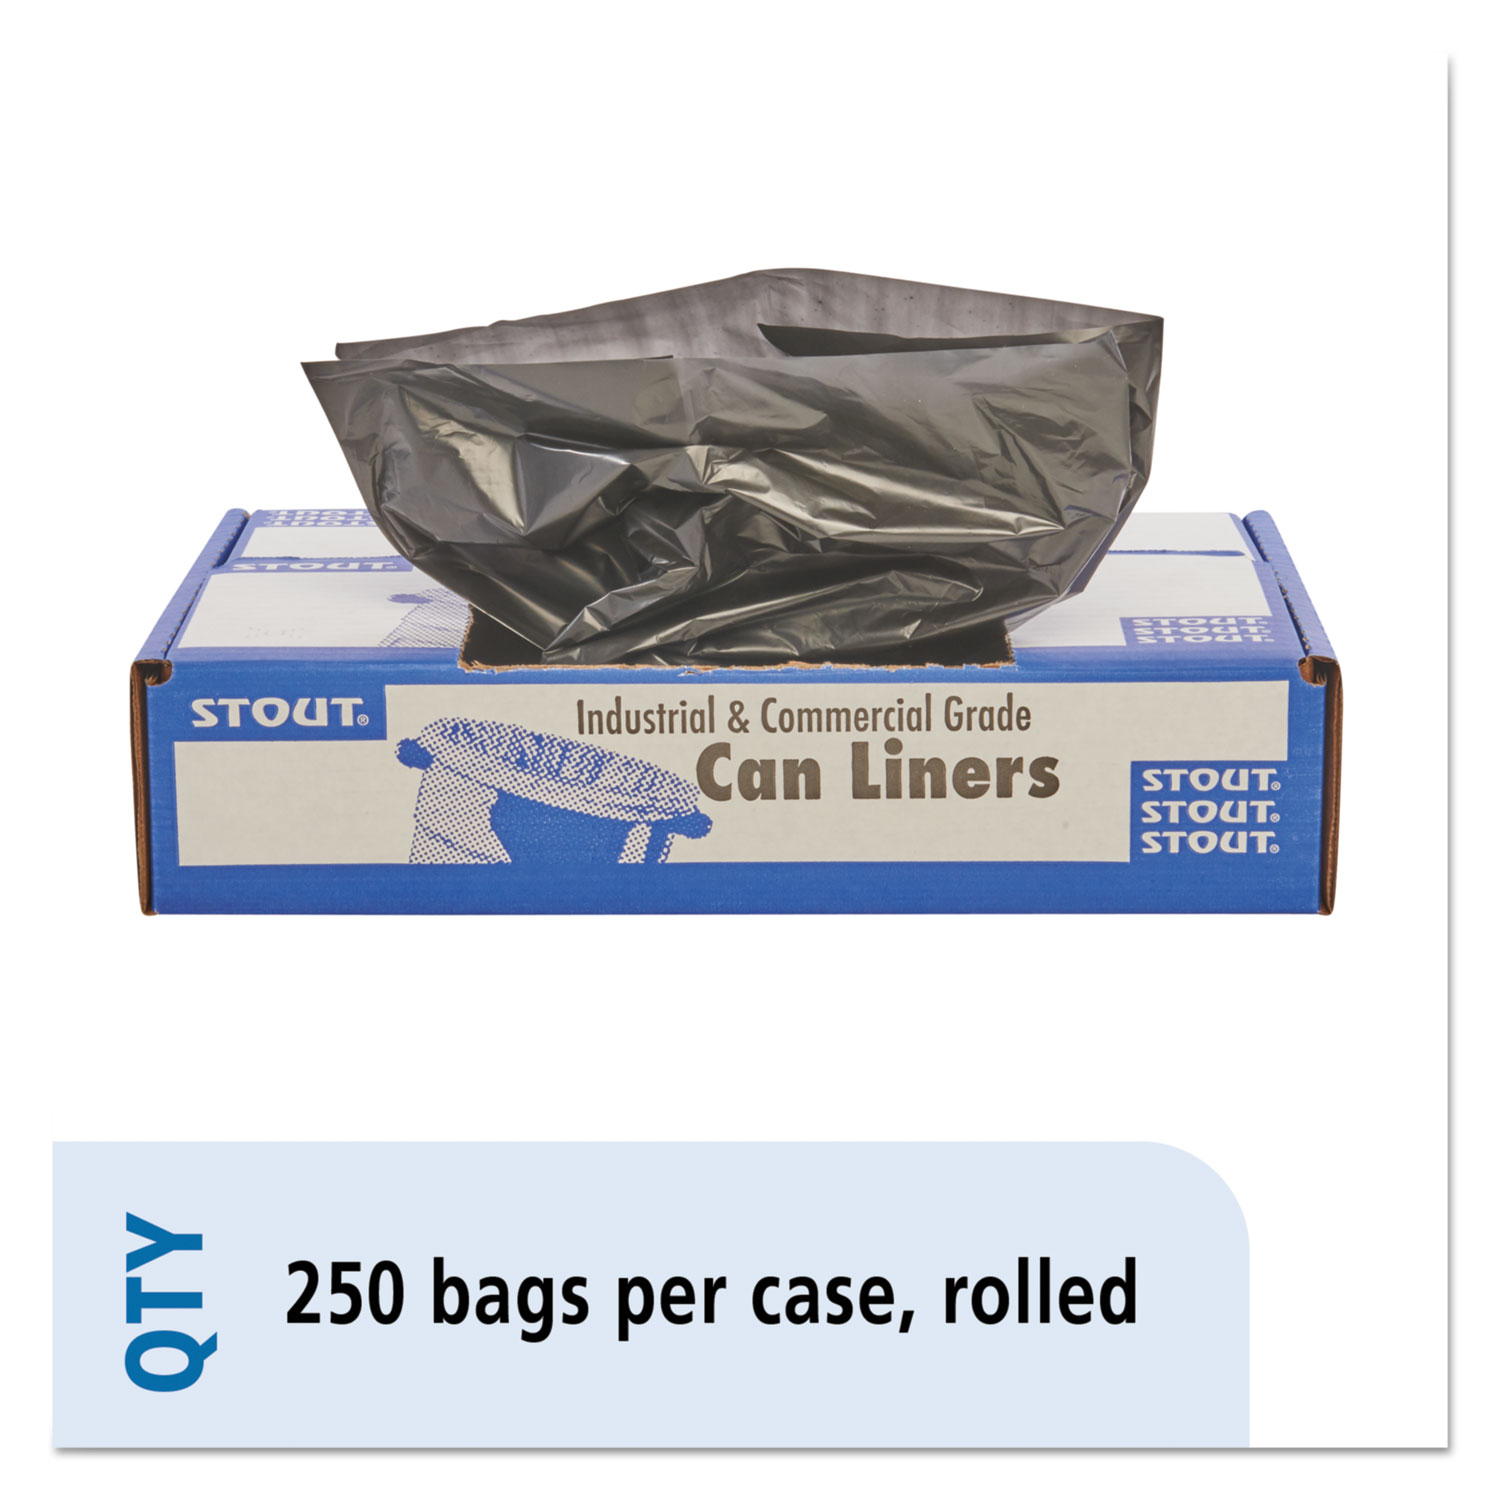  Stout by Envision T2424B10 Total Recycled Content Plastic Trash Bags, 10 gal, 1 mil, 24 x 24, Brown/Black, 250/Carton (STOT2424B10) 